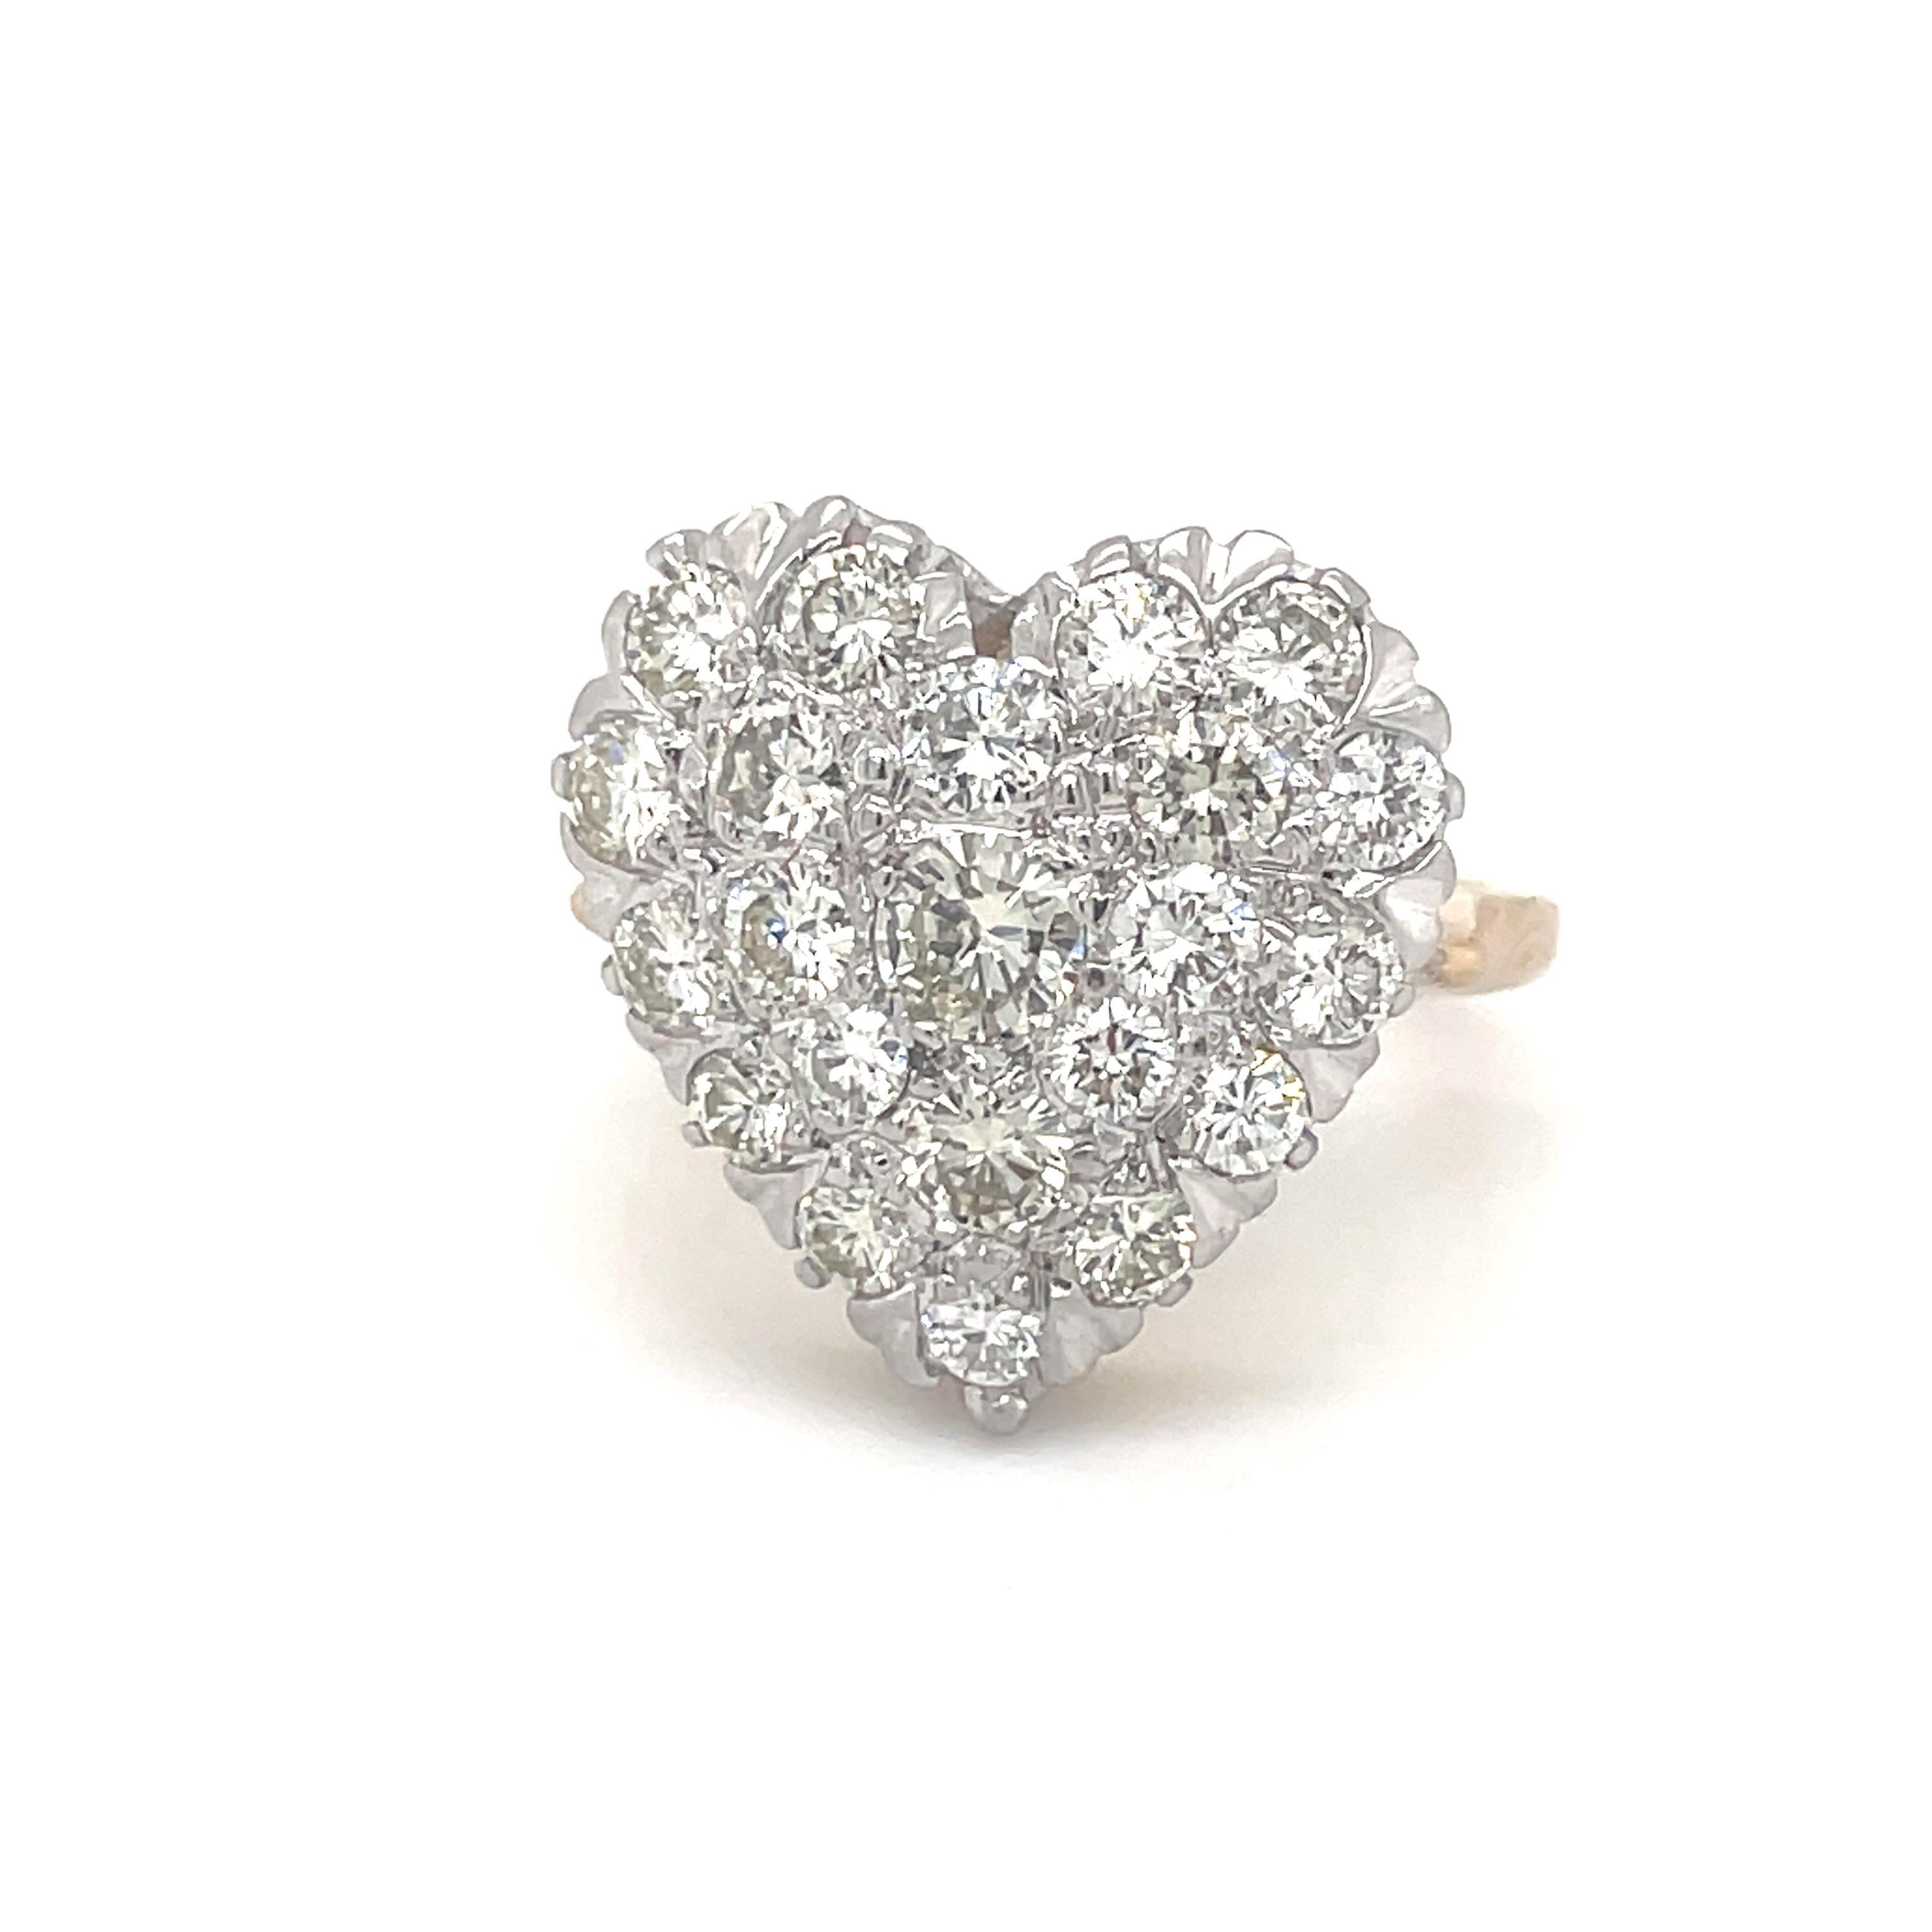  A bright eye-catching ring, set with a sparkling diamond heart.  14K yellow gold; the diamonds are set in white gold. With approximately 1.35 carats of diamonds.  Size 5 1/2; fits like a size 6. and can be custom-sized.  A bold look.  You can wear